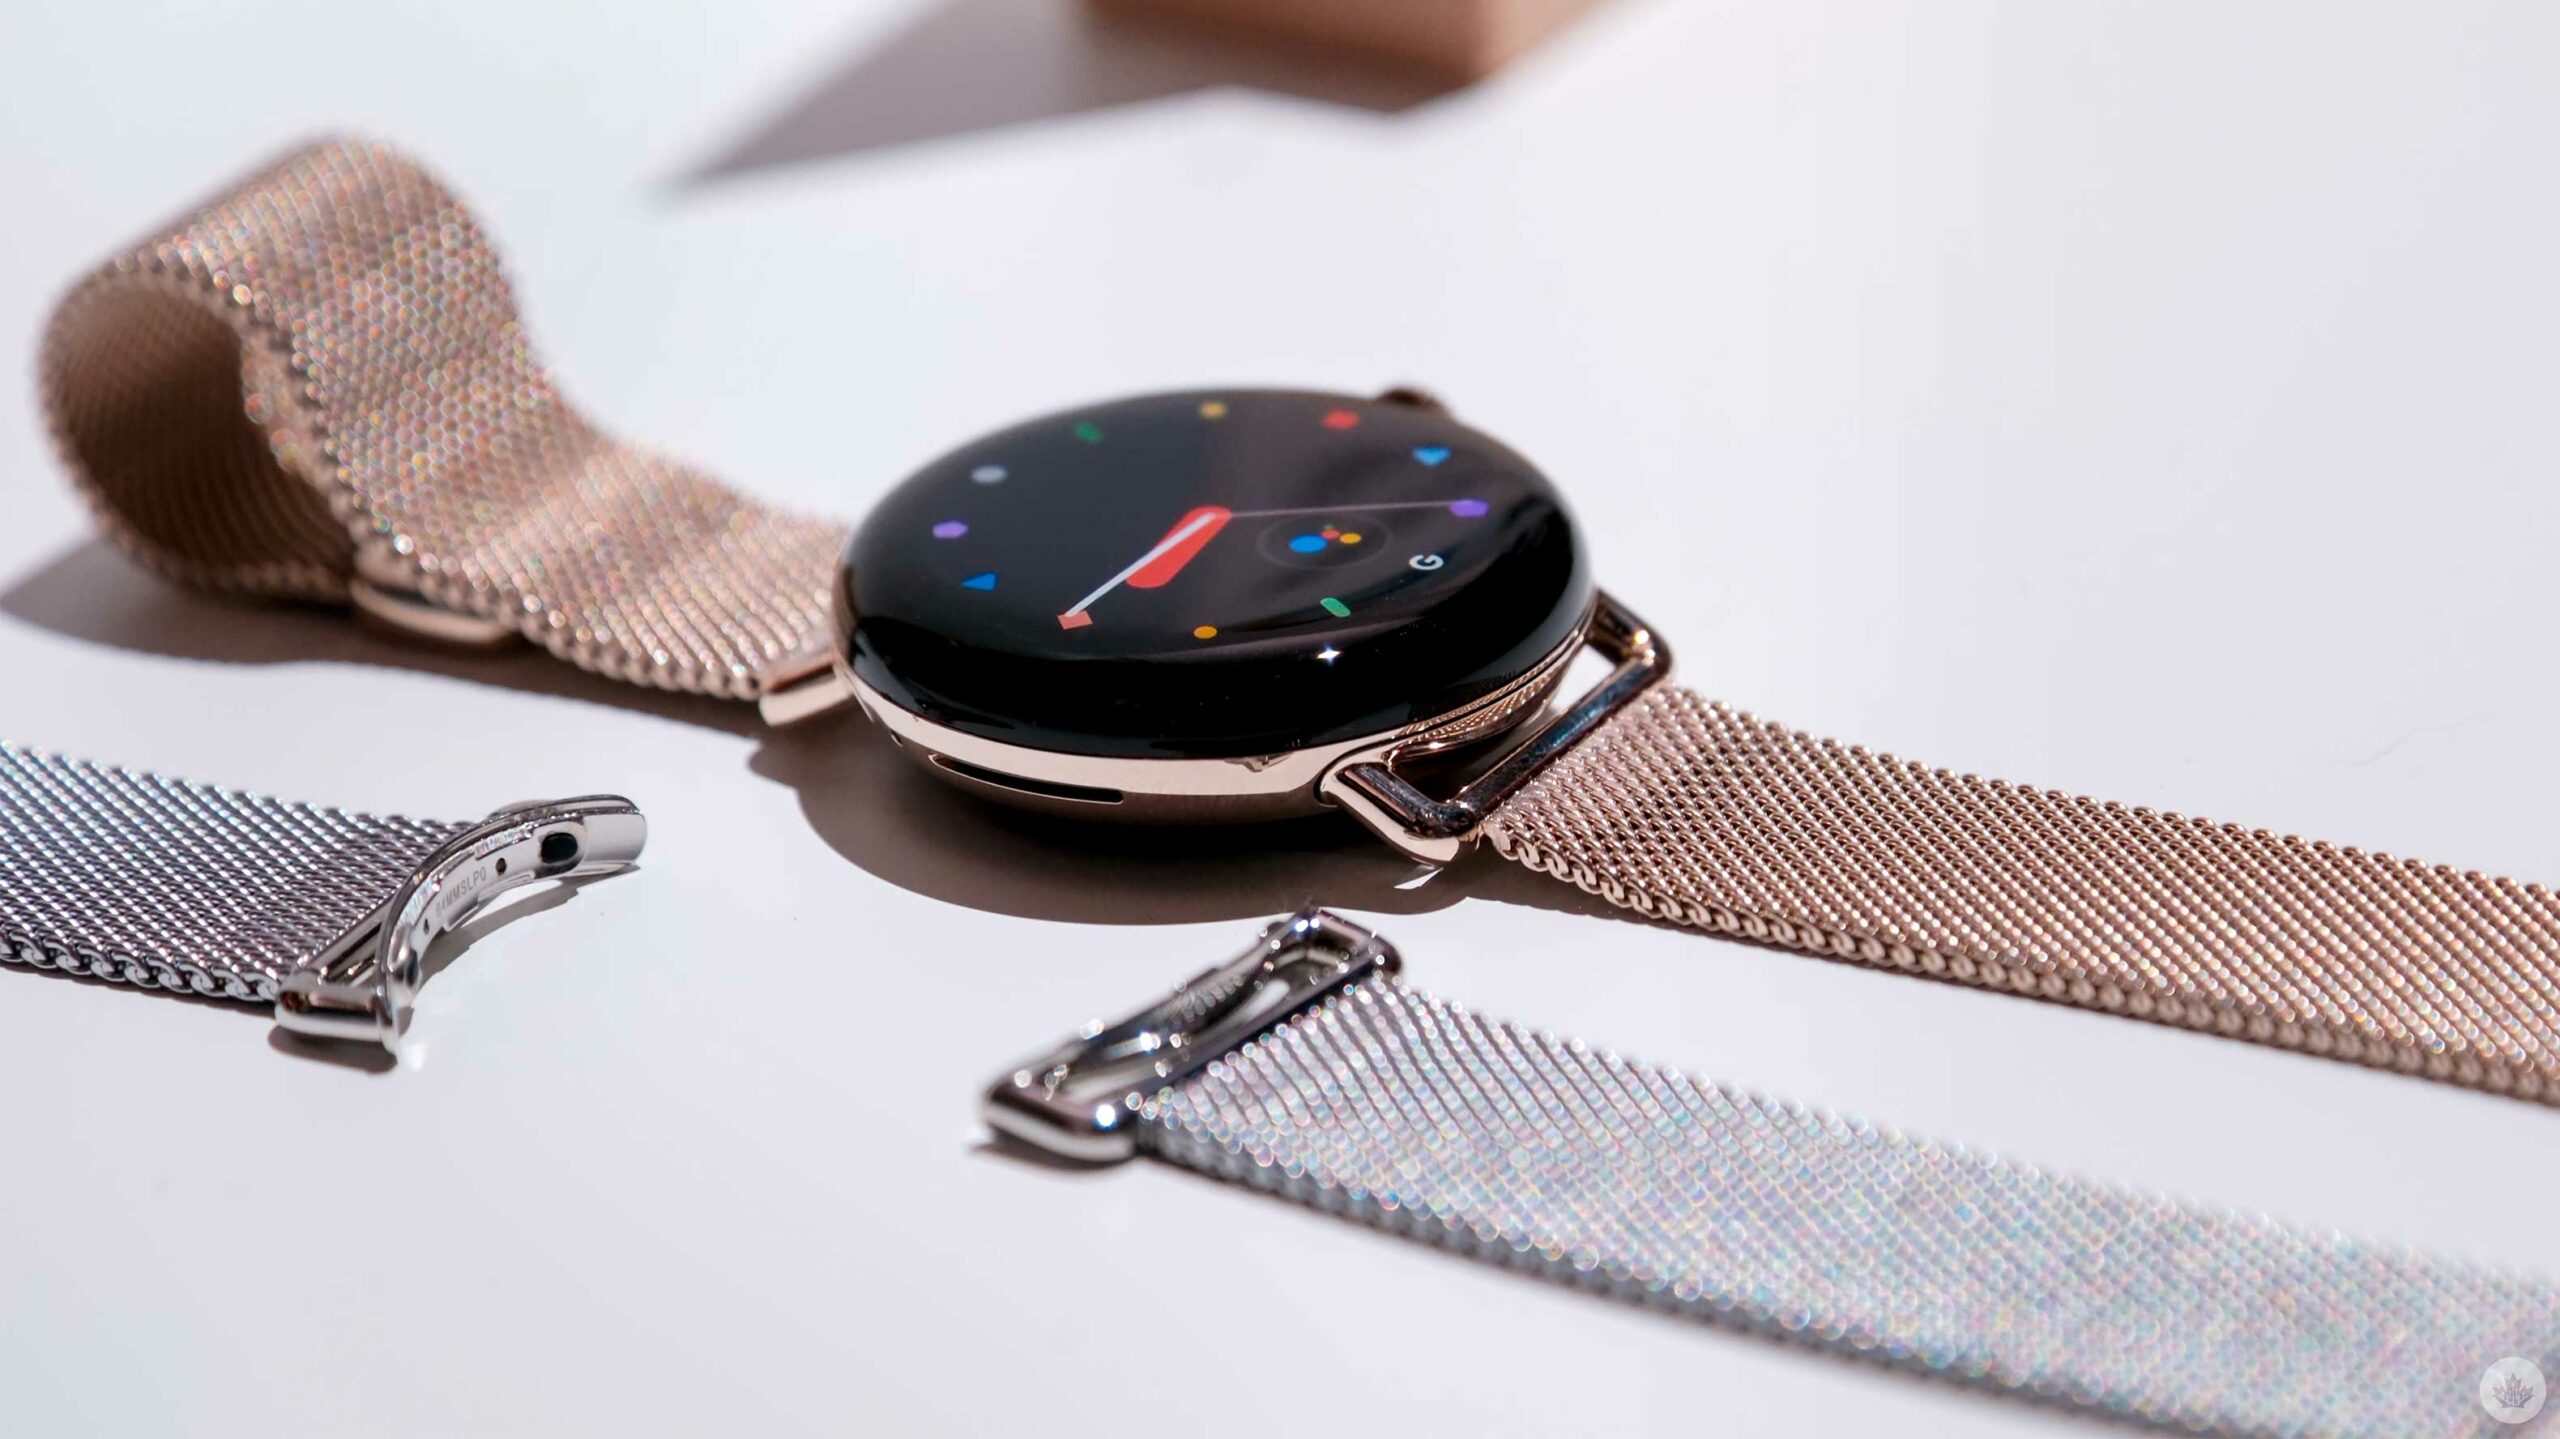 Googles Pixel Watch Is An Elegant Smartwatch With Tons Of Fitness And Health Features